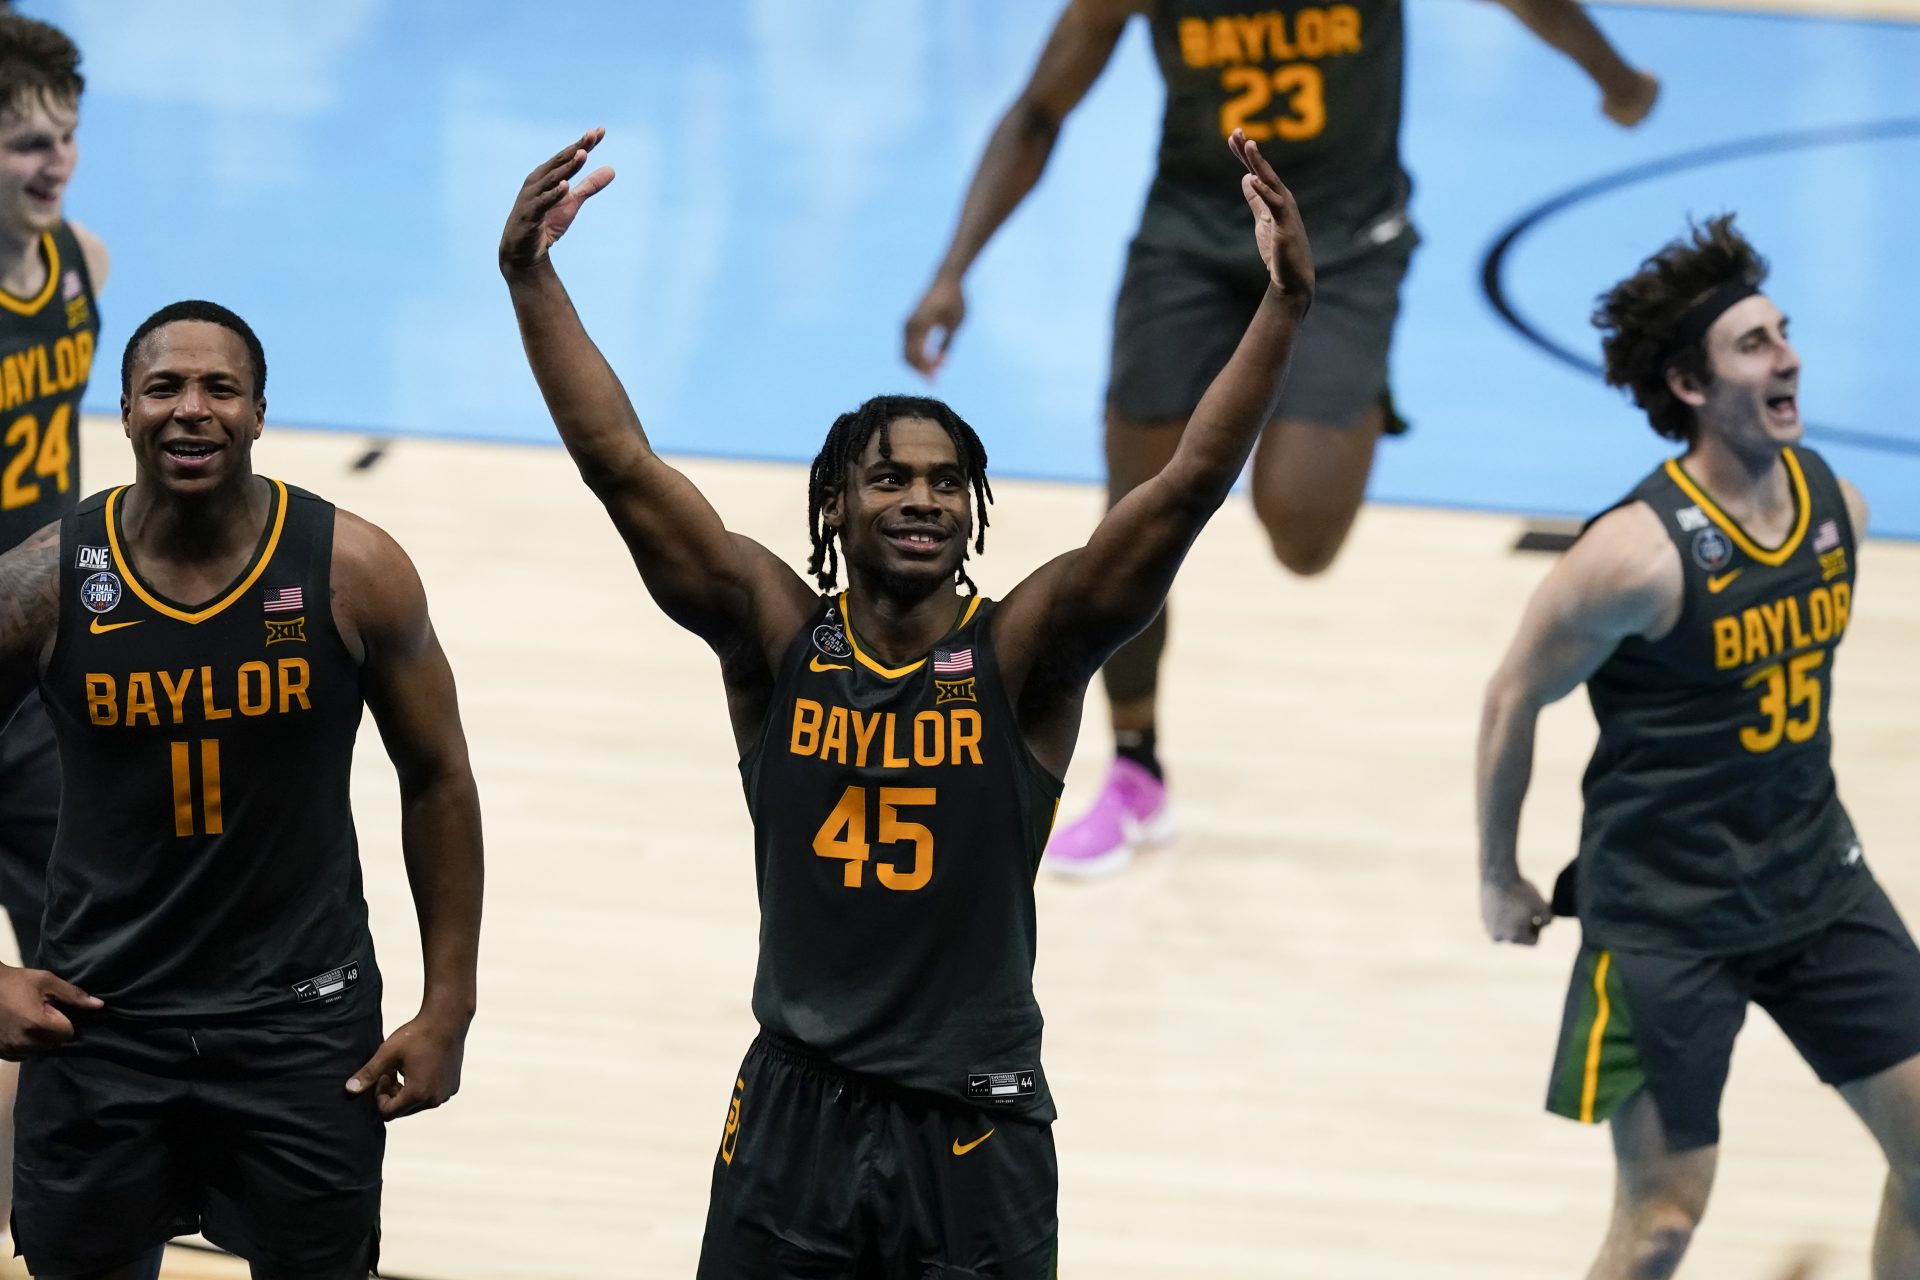 Baylor guard Davion Mitchell (45) celebrates at the end of the championship game against Gonzaga in the men's Final Four NCAA college basketball tournament, Monday, April 5, 2021, at Lucas Oil Stadium in Indianapolis. Baylor won 86-70.